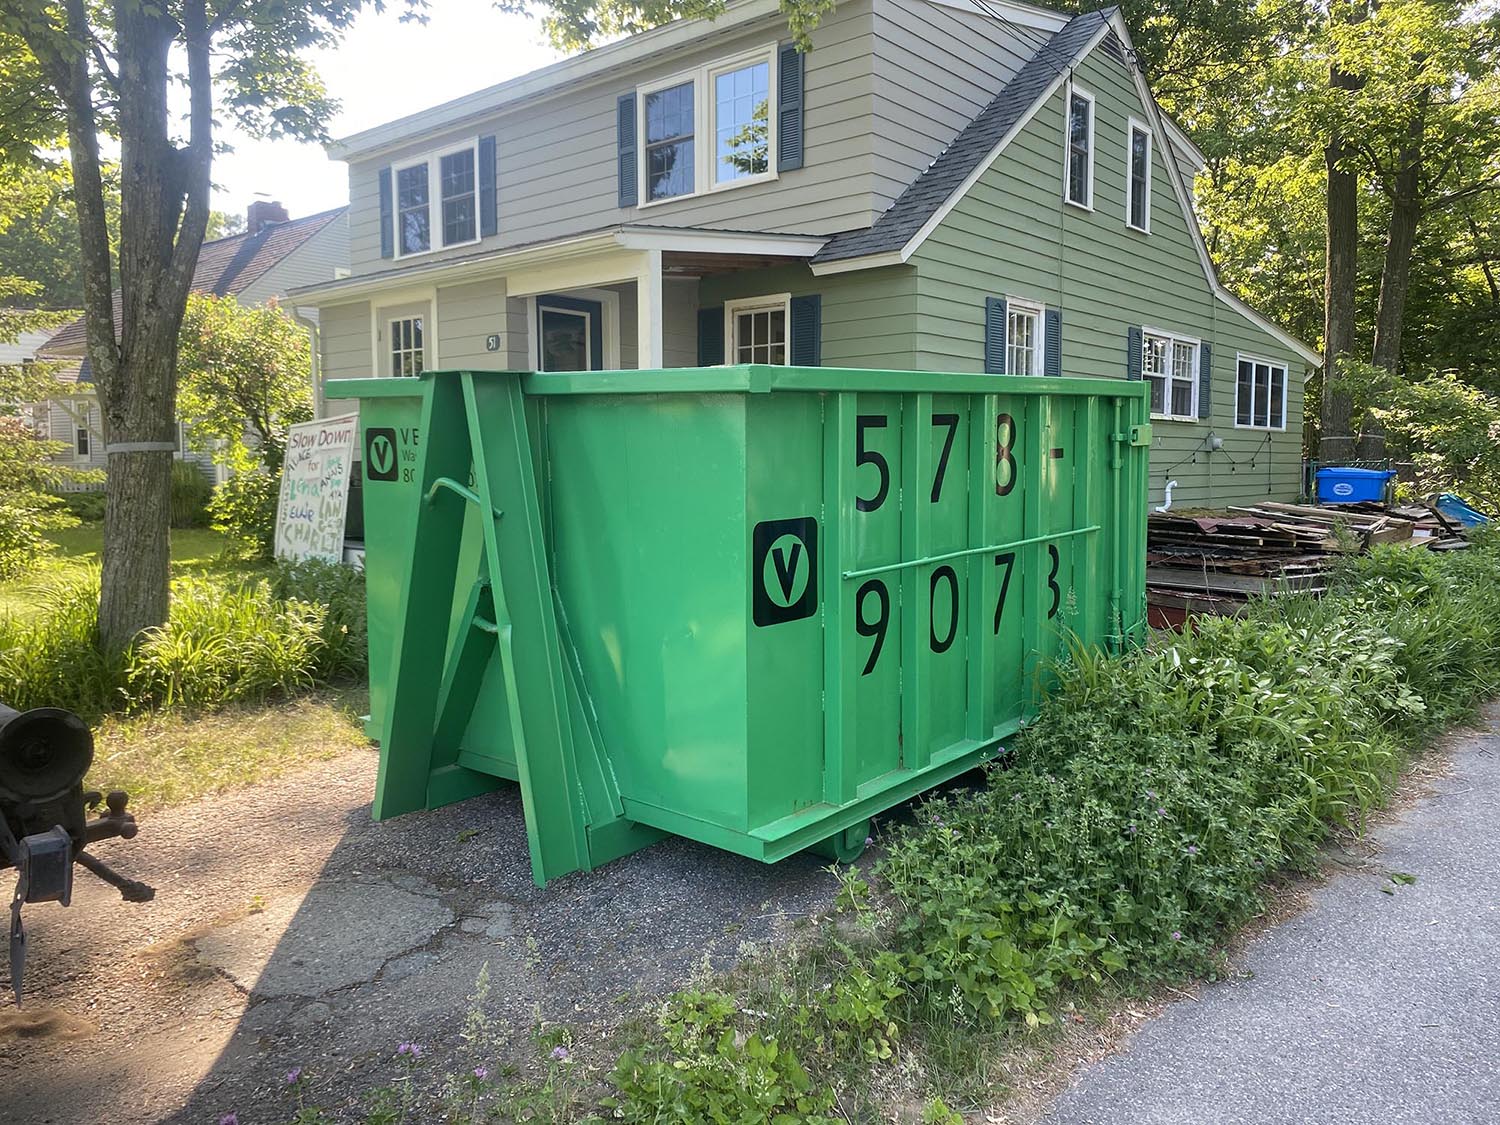 Rent a Dumpster in Vermont For Your Next Project